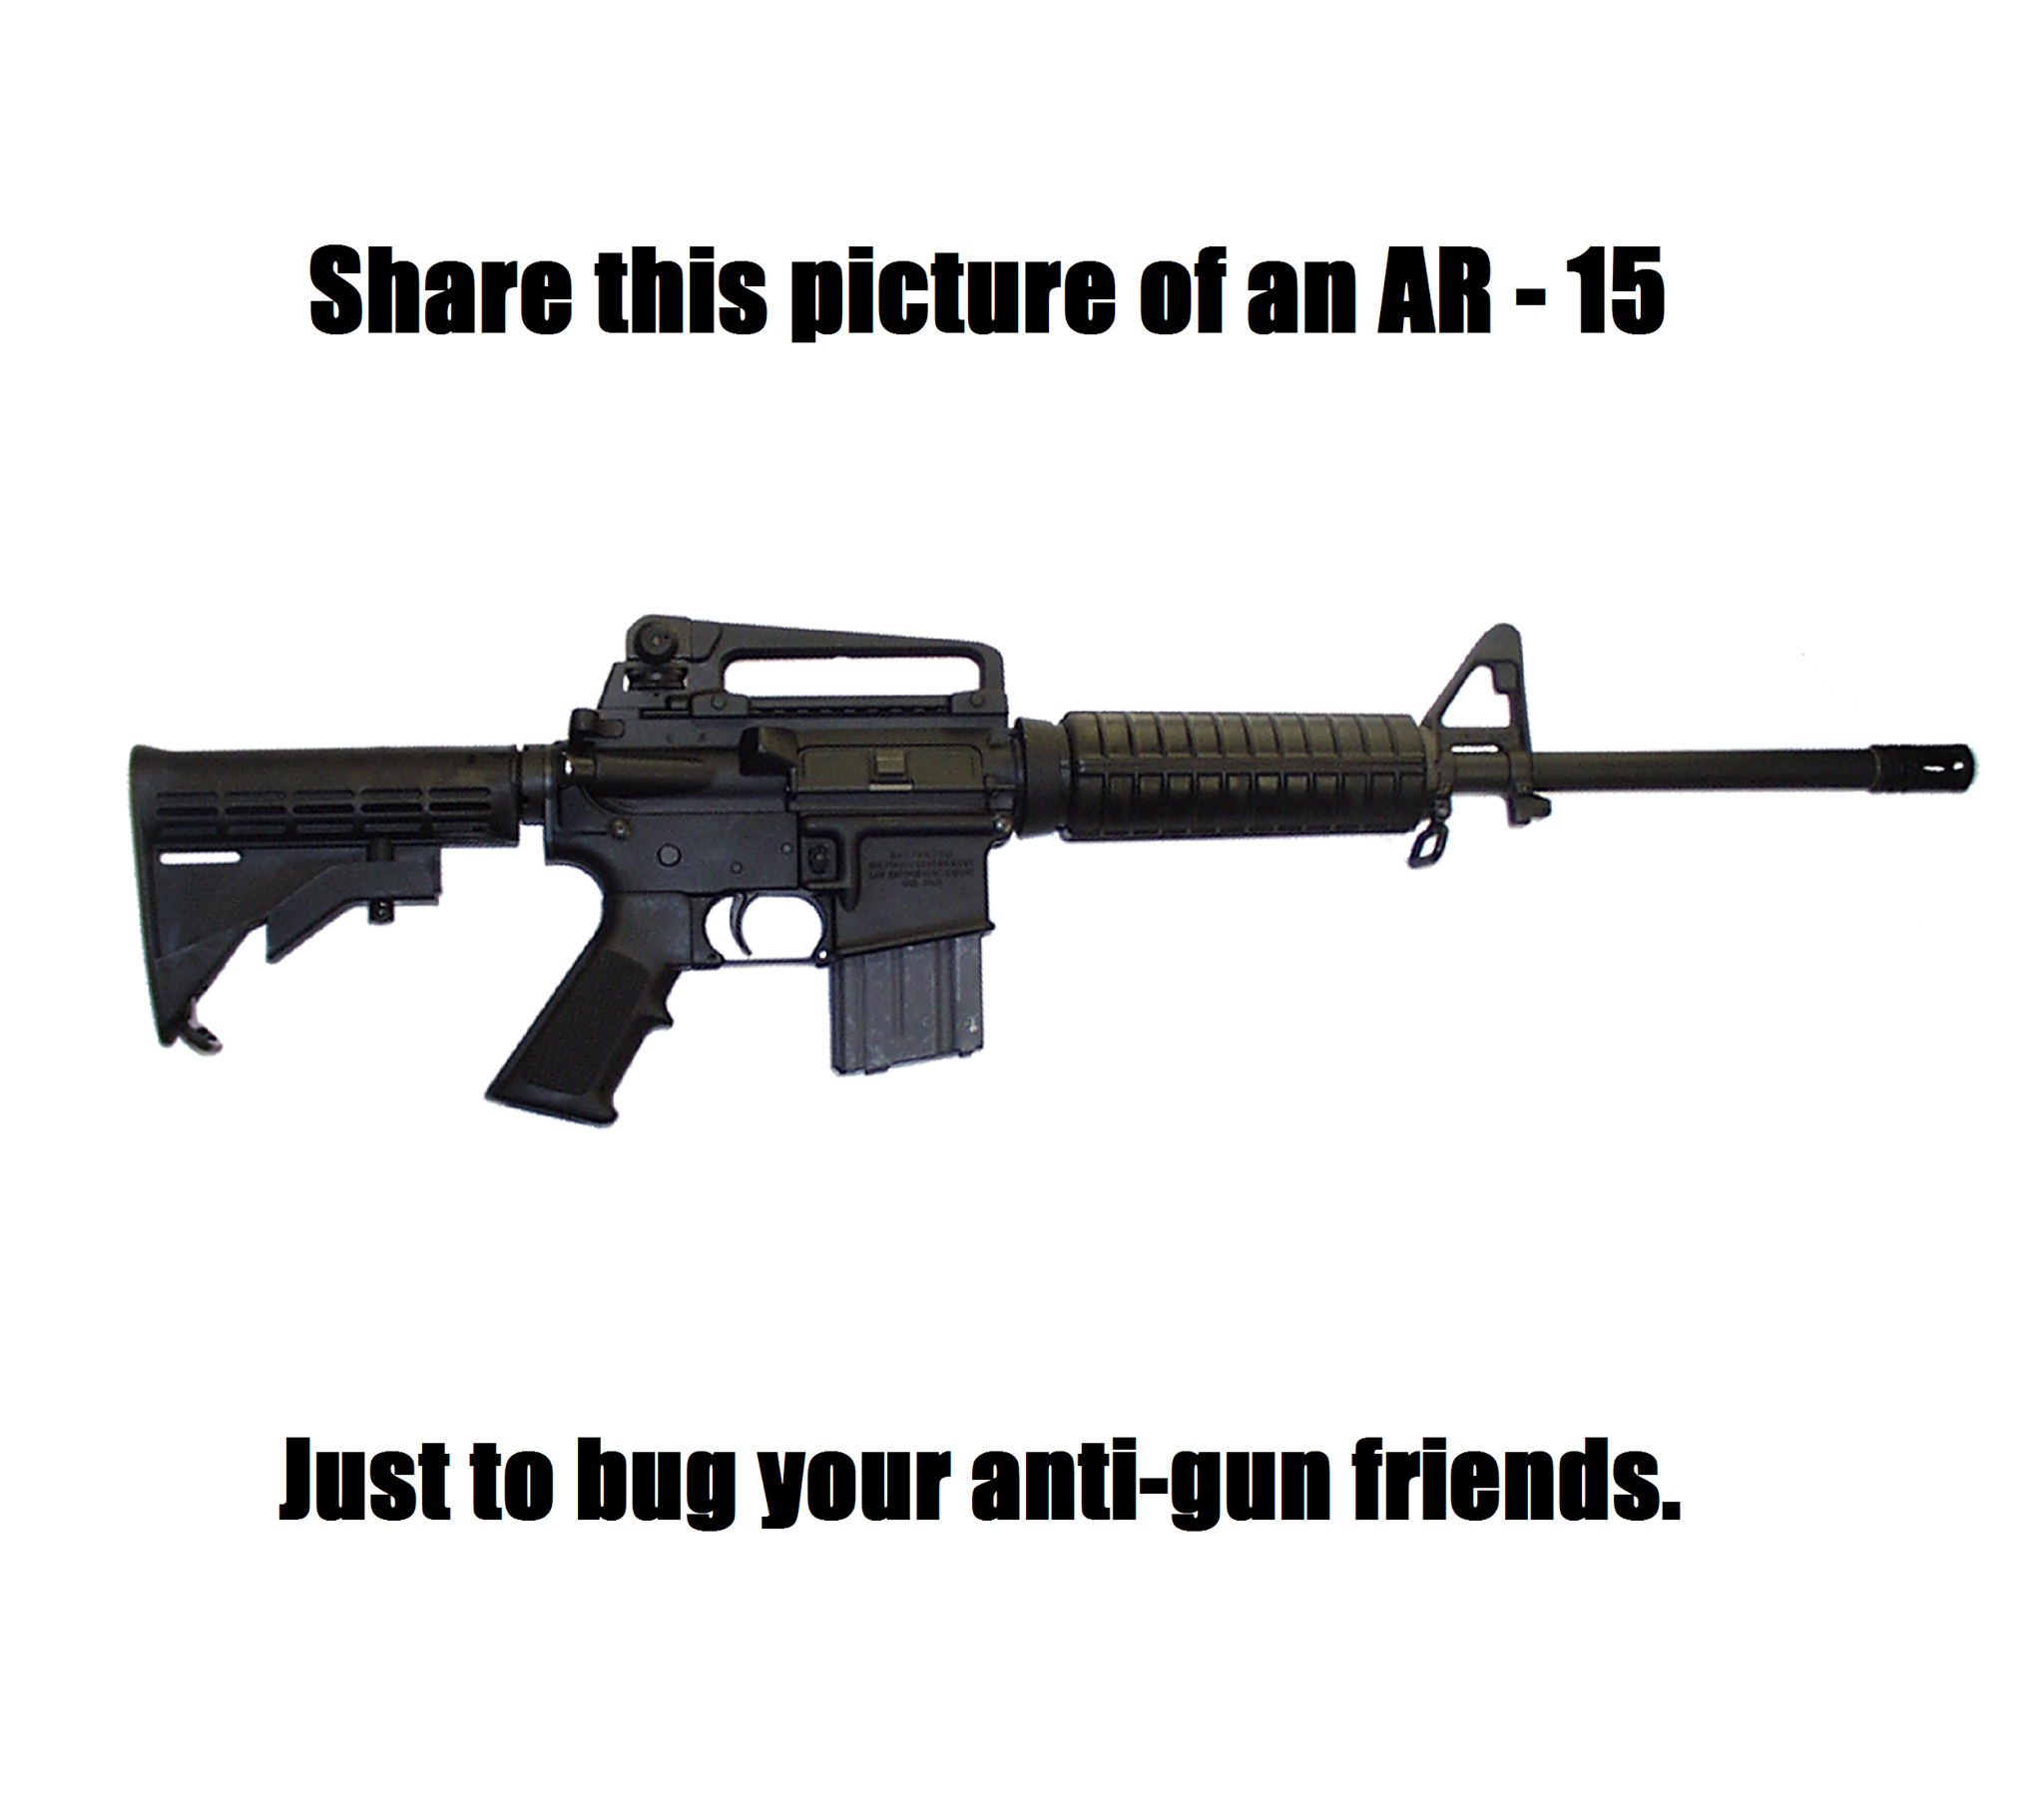 share-this-picture-of-an-ar-15-just-to-bug-your-anti-gun-friends